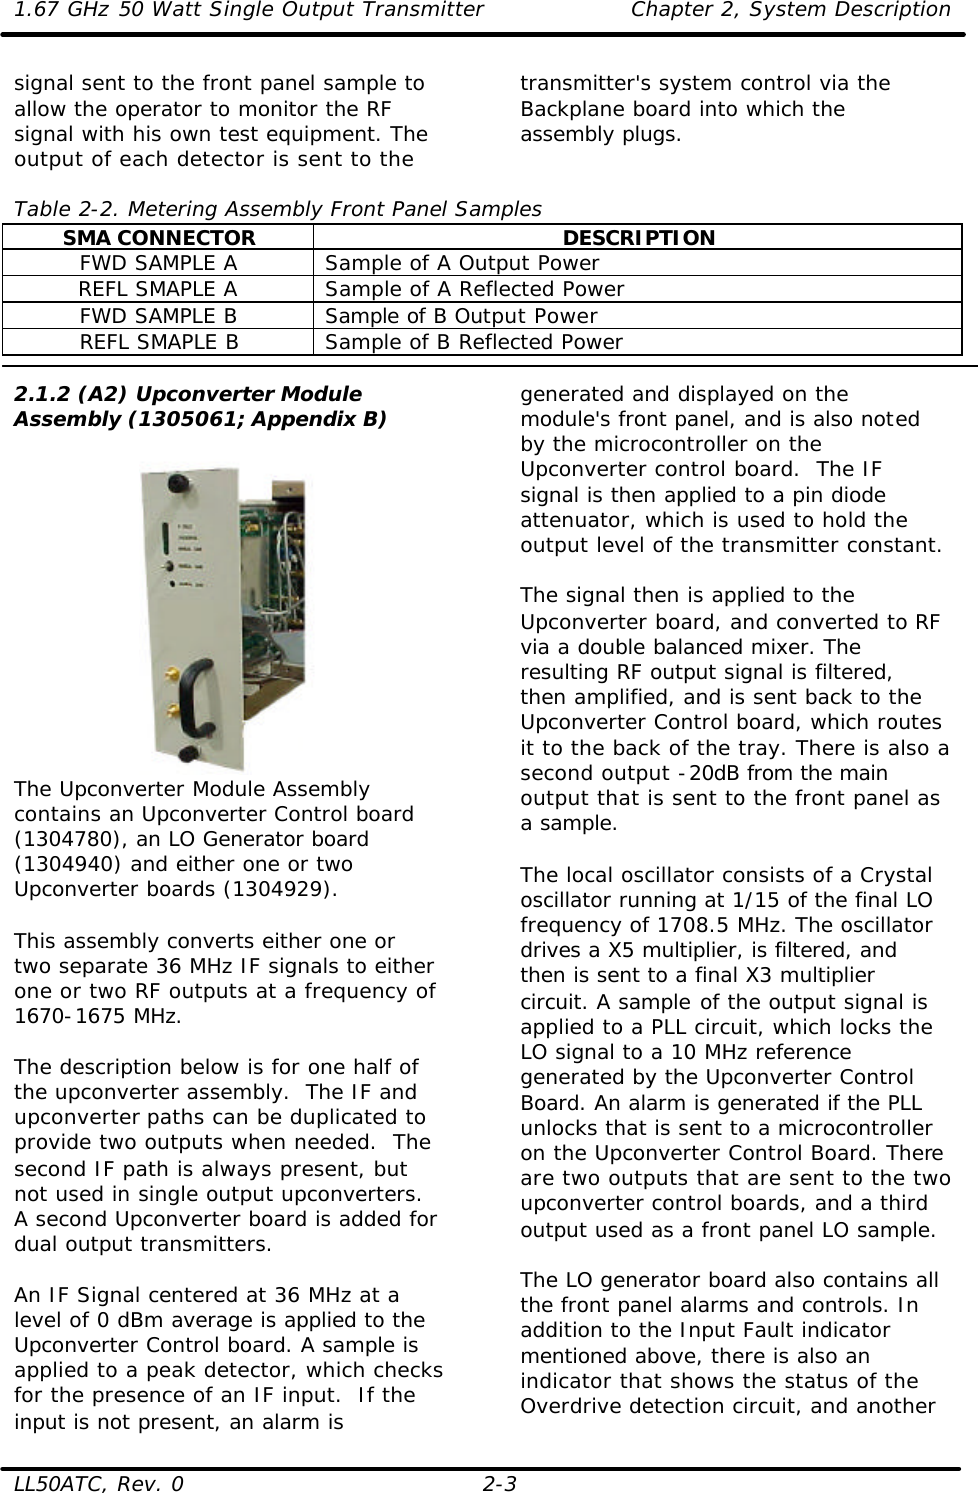 1.67 GHz 50 Watt Single Output Transmitter Chapter 2, System Description  LL50ATC, Rev. 0 2-3 signal sent to the front panel sample to allow the operator to monitor the RF signal with his own test equipment. The output of each detector is sent to the transmitter&apos;s system control via the Backplane board into which the assembly plugs.   Table 2-2. Metering Assembly Front Panel Samples SMA CONNECTOR DESCRIPTION FWD SAMPLE A Sample of A Output Power REFL SMAPLE A Sample of A Reflected Power FWD SAMPLE B Sample of B Output Power REFL SMAPLE B Sample of B Reflected Power  2.1.2 (A2) Upconverter Module Assembly (1305061; Appendix B)   The Upconverter Module Assembly contains an Upconverter Control board (1304780), an LO Generator board (1304940) and either one or two Upconverter boards (1304929).  This assembly converts either one or two separate 36 MHz IF signals to either one or two RF outputs at a frequency of 1670-1675 MHz.  The description below is for one half of the upconverter assembly.  The IF and upconverter paths can be duplicated to provide two outputs when needed.  The second IF path is always present, but not used in single output upconverters. A second Upconverter board is added for dual output transmitters.  An IF Signal centered at 36 MHz at a level of 0 dBm average is applied to the Upconverter Control board. A sample is applied to a peak detector, which checks for the presence of an IF input.  If the input is not present, an alarm is generated and displayed on the module&apos;s front panel, and is also noted by the microcontroller on the Upconverter control board.  The IF signal is then applied to a pin diode attenuator, which is used to hold the output level of the transmitter constant.   The signal then is applied to the Upconverter board, and converted to RF via a double balanced mixer. The resulting RF output signal is filtered, then amplified, and is sent back to the Upconverter Control board, which routes it to the back of the tray. There is also a second output -20dB from the main output that is sent to the front panel as a sample.   The local oscillator consists of a Crystal oscillator running at 1/15 of the final LO frequency of 1708.5 MHz. The oscillator drives a X5 multiplier, is filtered, and then is sent to a final X3 multiplier circuit. A sample of the output signal is applied to a PLL circuit, which locks the LO signal to a 10 MHz reference generated by the Upconverter Control Board. An alarm is generated if the PLL unlocks that is sent to a microcontroller on the Upconverter Control Board. There are two outputs that are sent to the two upconverter control boards, and a third output used as a front panel LO sample.   The LO generator board also contains all the front panel alarms and controls. In addition to the Input Fault indicator mentioned above, there is also an indicator that shows the status of the Overdrive detection circuit, and another 